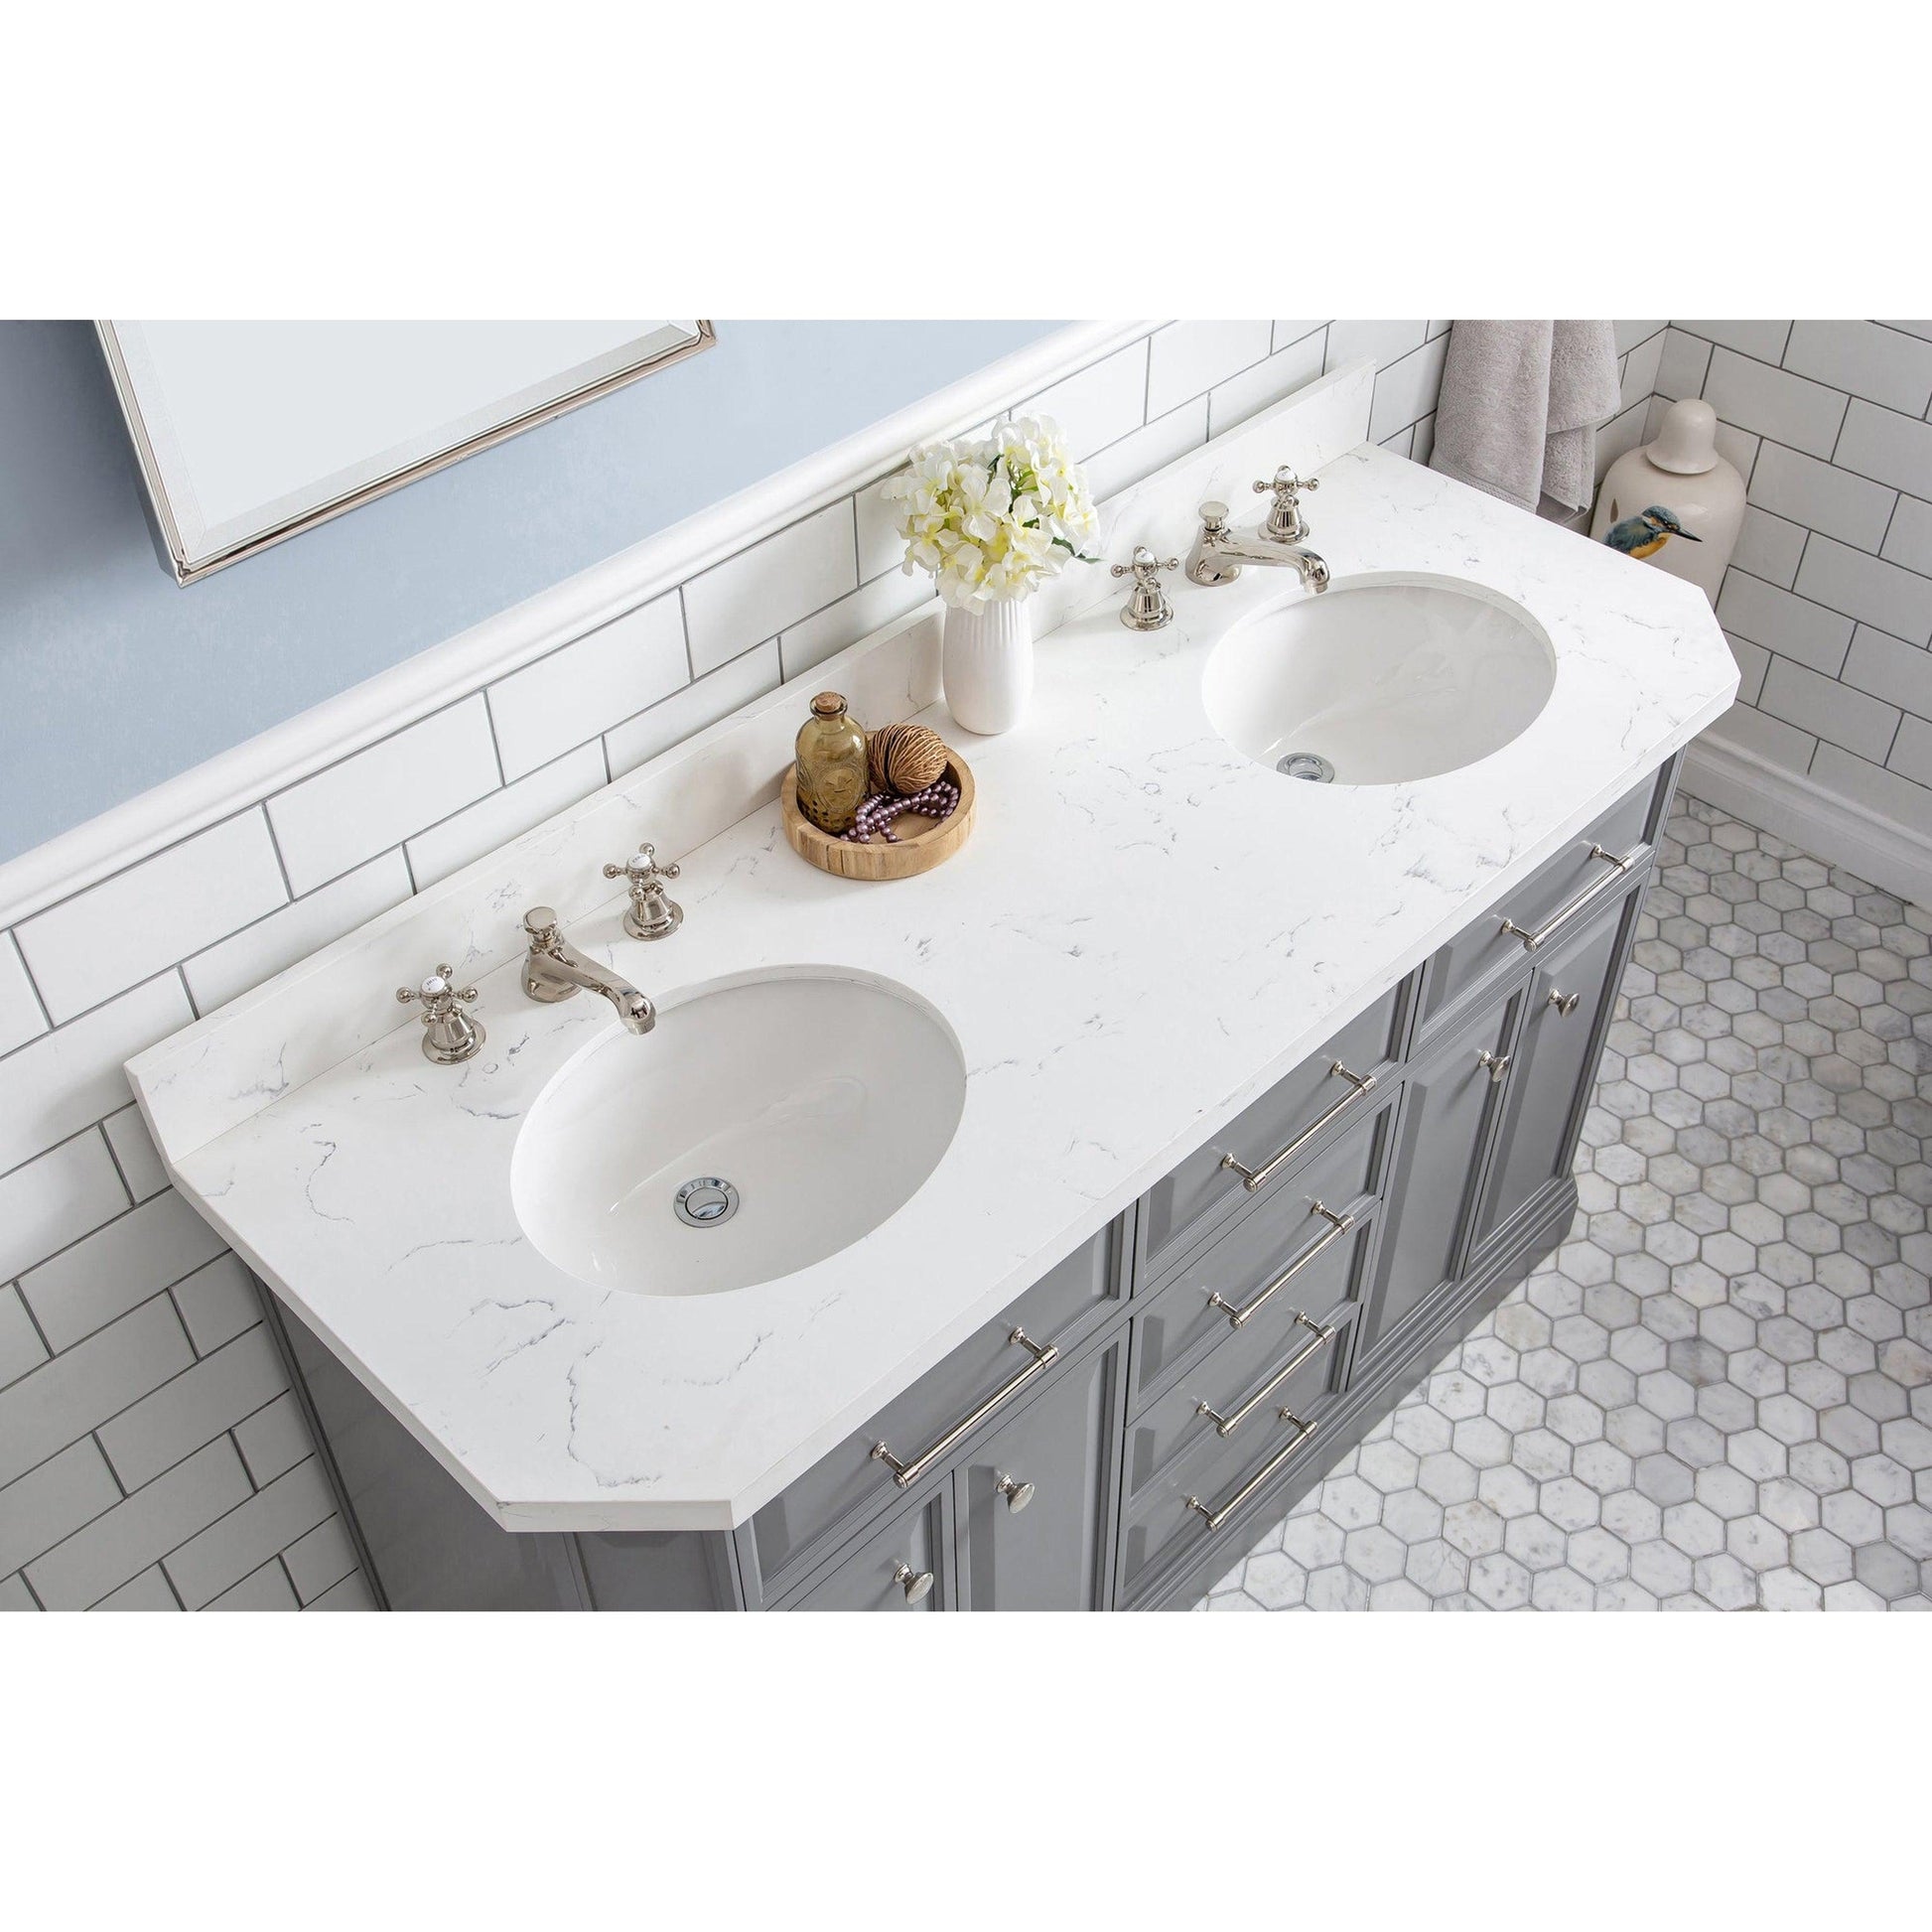 Water Creation Palace 60" Quartz Carrara Cashmere Grey Bathroom Vanity Set With Hardware And F2-0009 Faucets in Polished Nickel (PVD) Finish